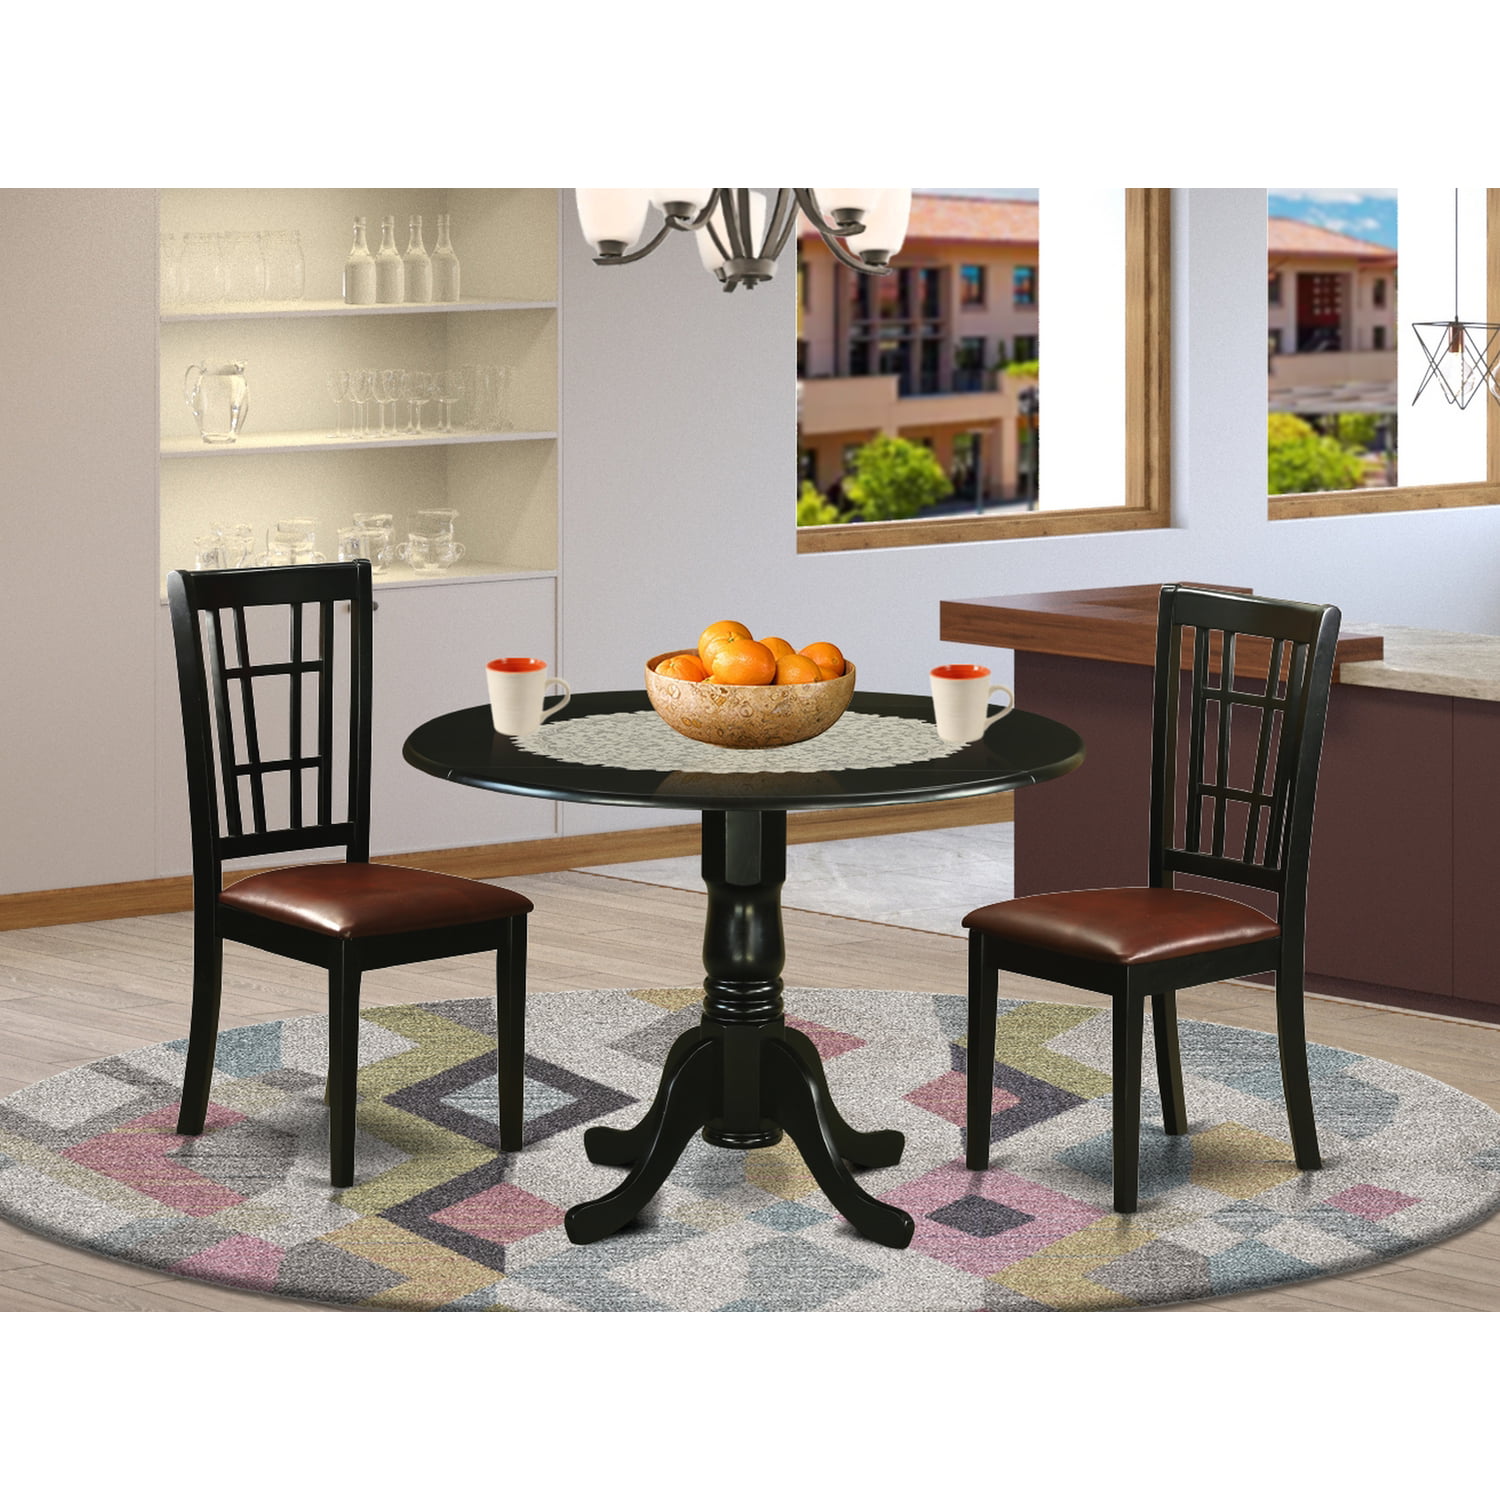 Small Round Black Kitchen Table And Chairs – I Hate Being Bored